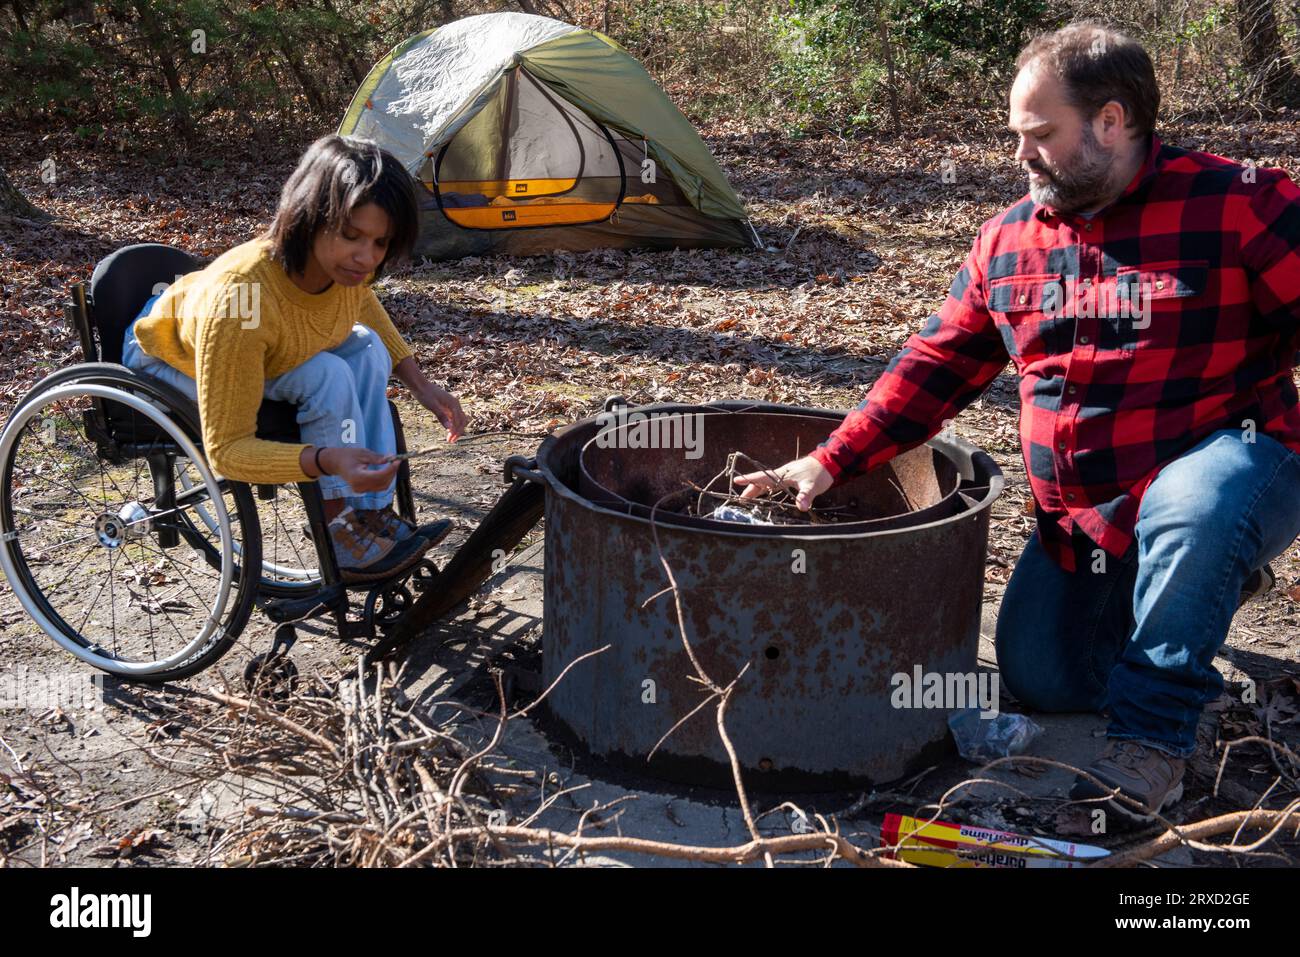 An outdoorsy couple starts a campfire at their campsite. Both are disabled but love the outdoors. Stock Photo